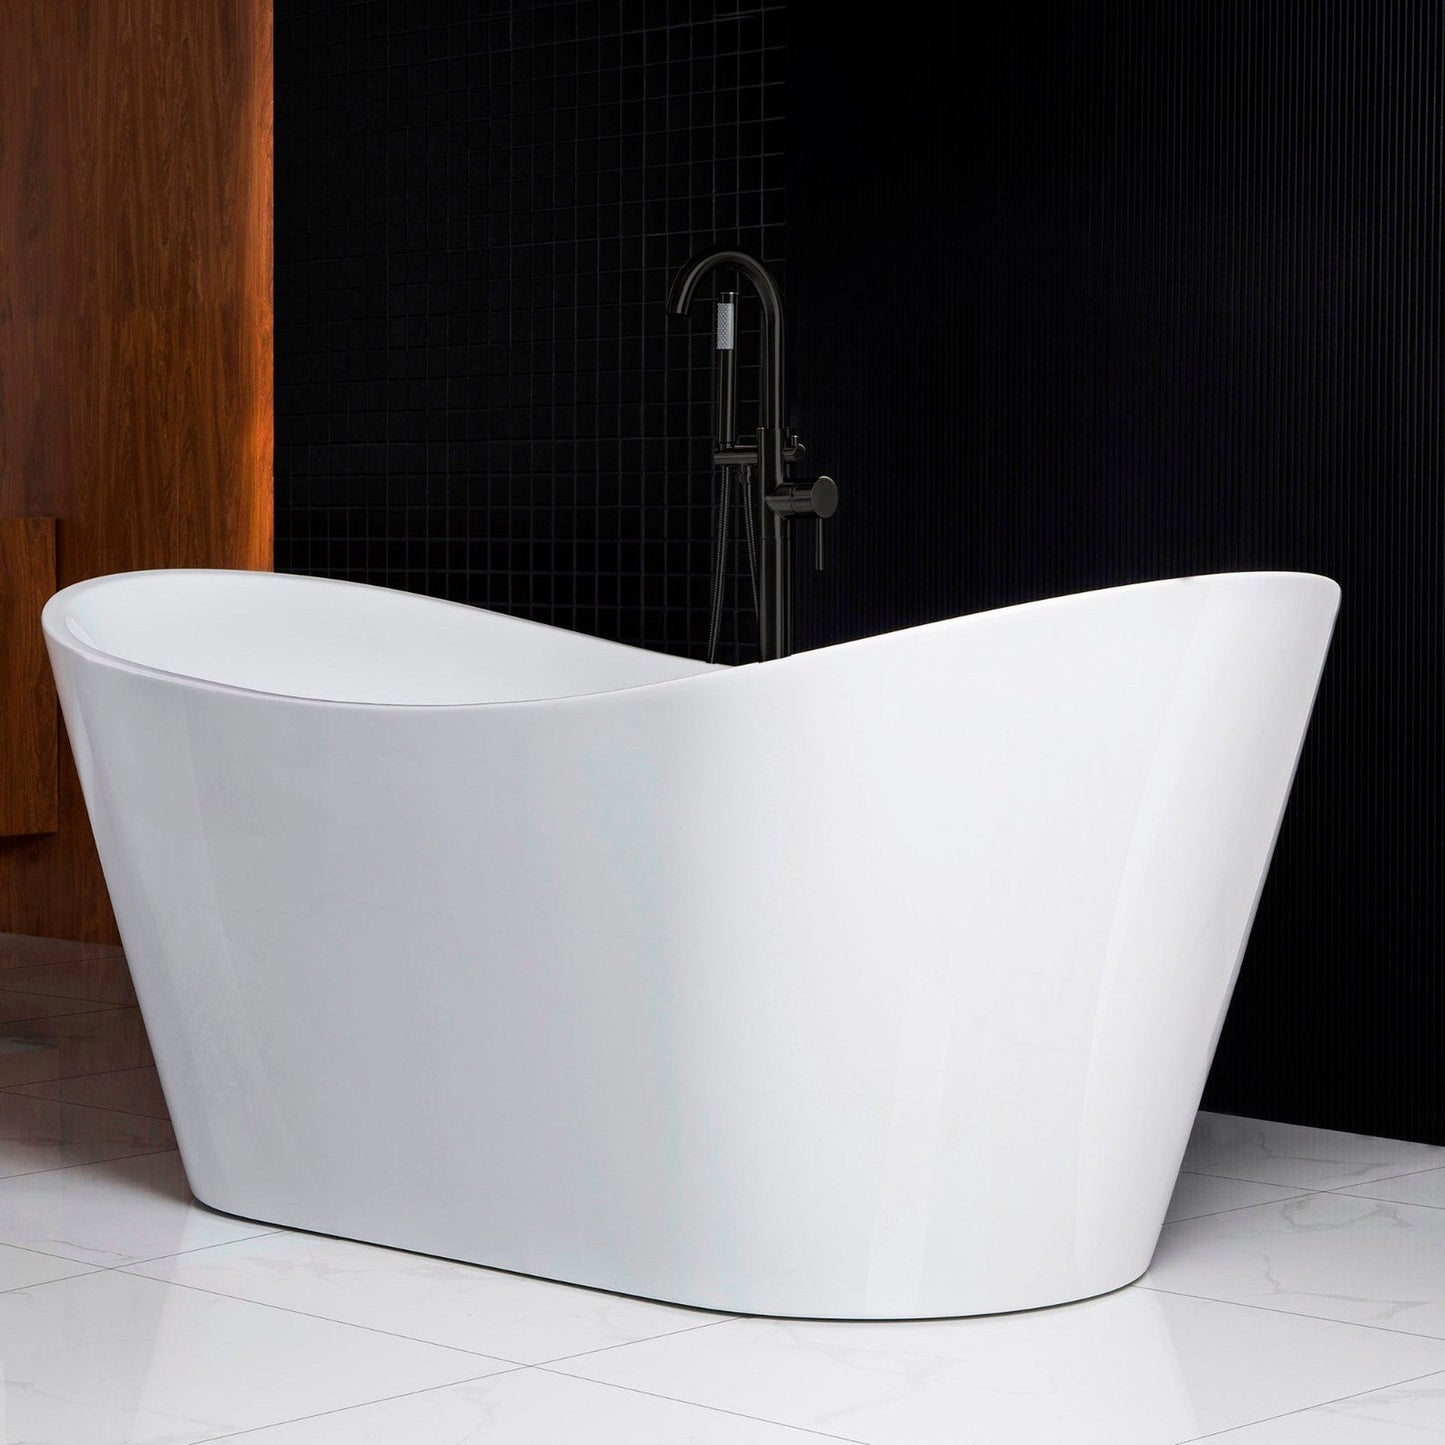 WoodBridge B0010 67" White Acrylic Freestanding Contemporary Soaking Bathtub With Matte Black Drain, Overflow, F0009 Tub Filler and Caddy Tray